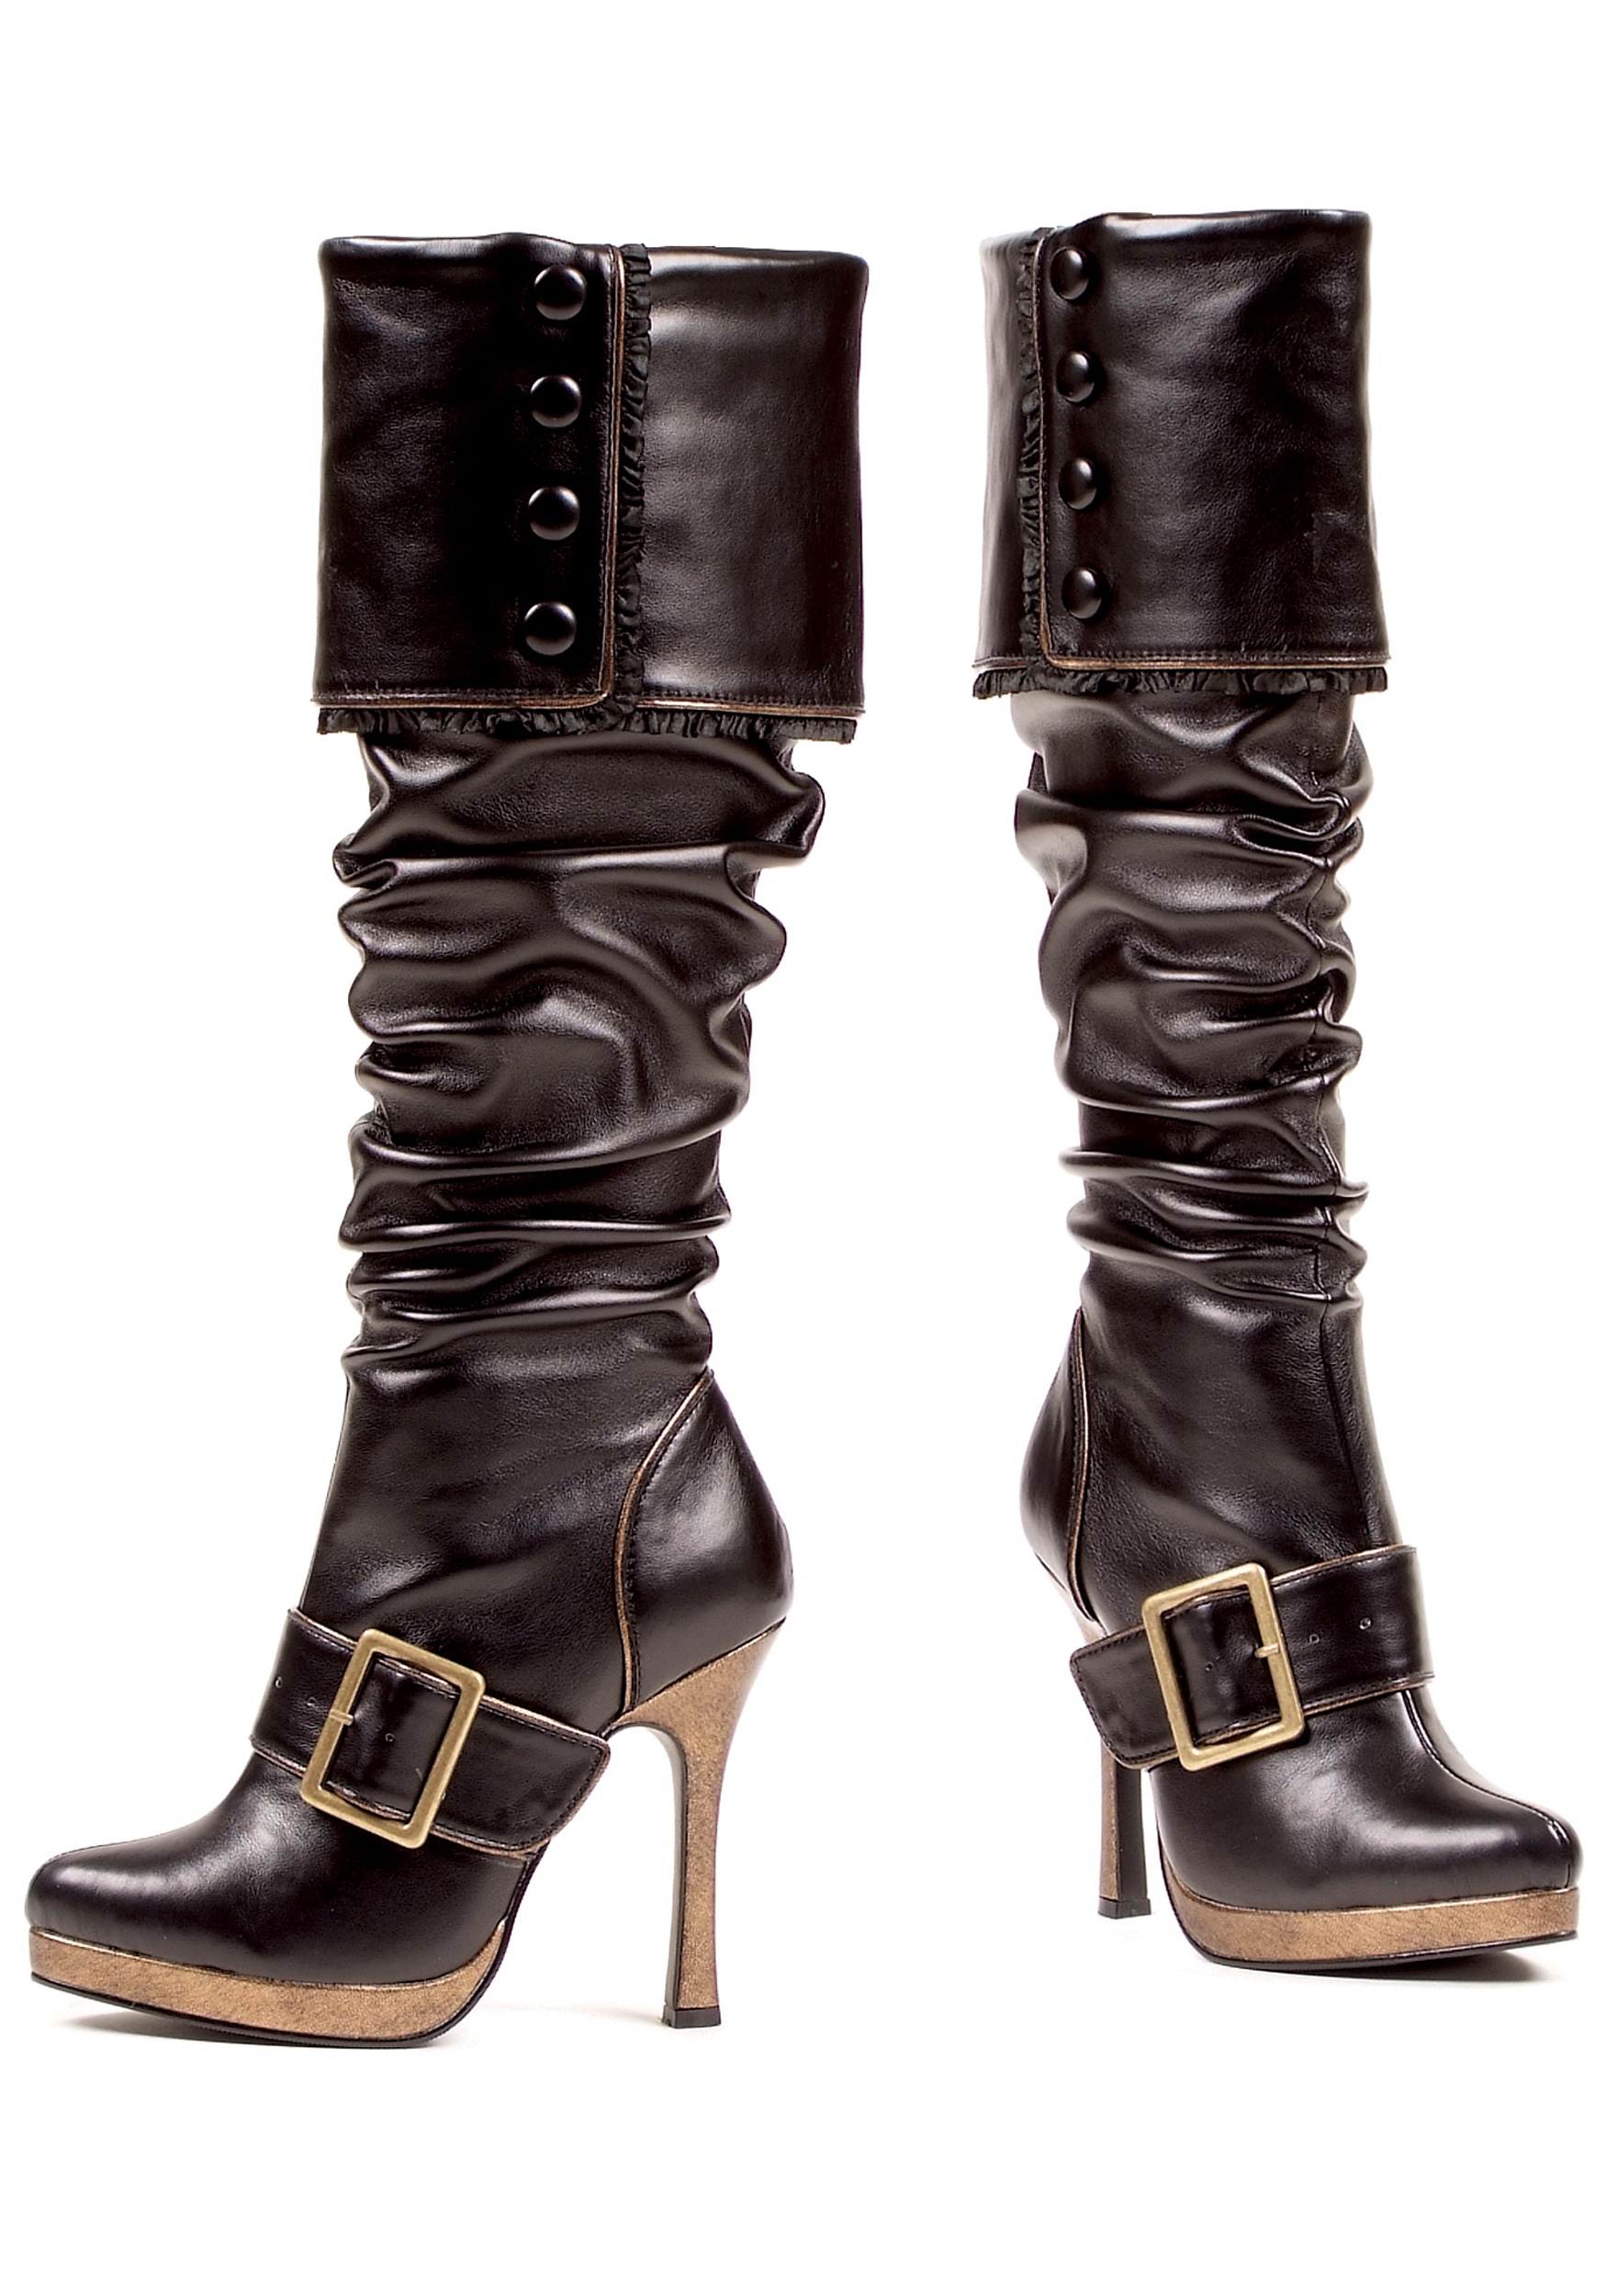 Image of Women's Sexy Buckle Pirate Boots ID EE426GRACE-11